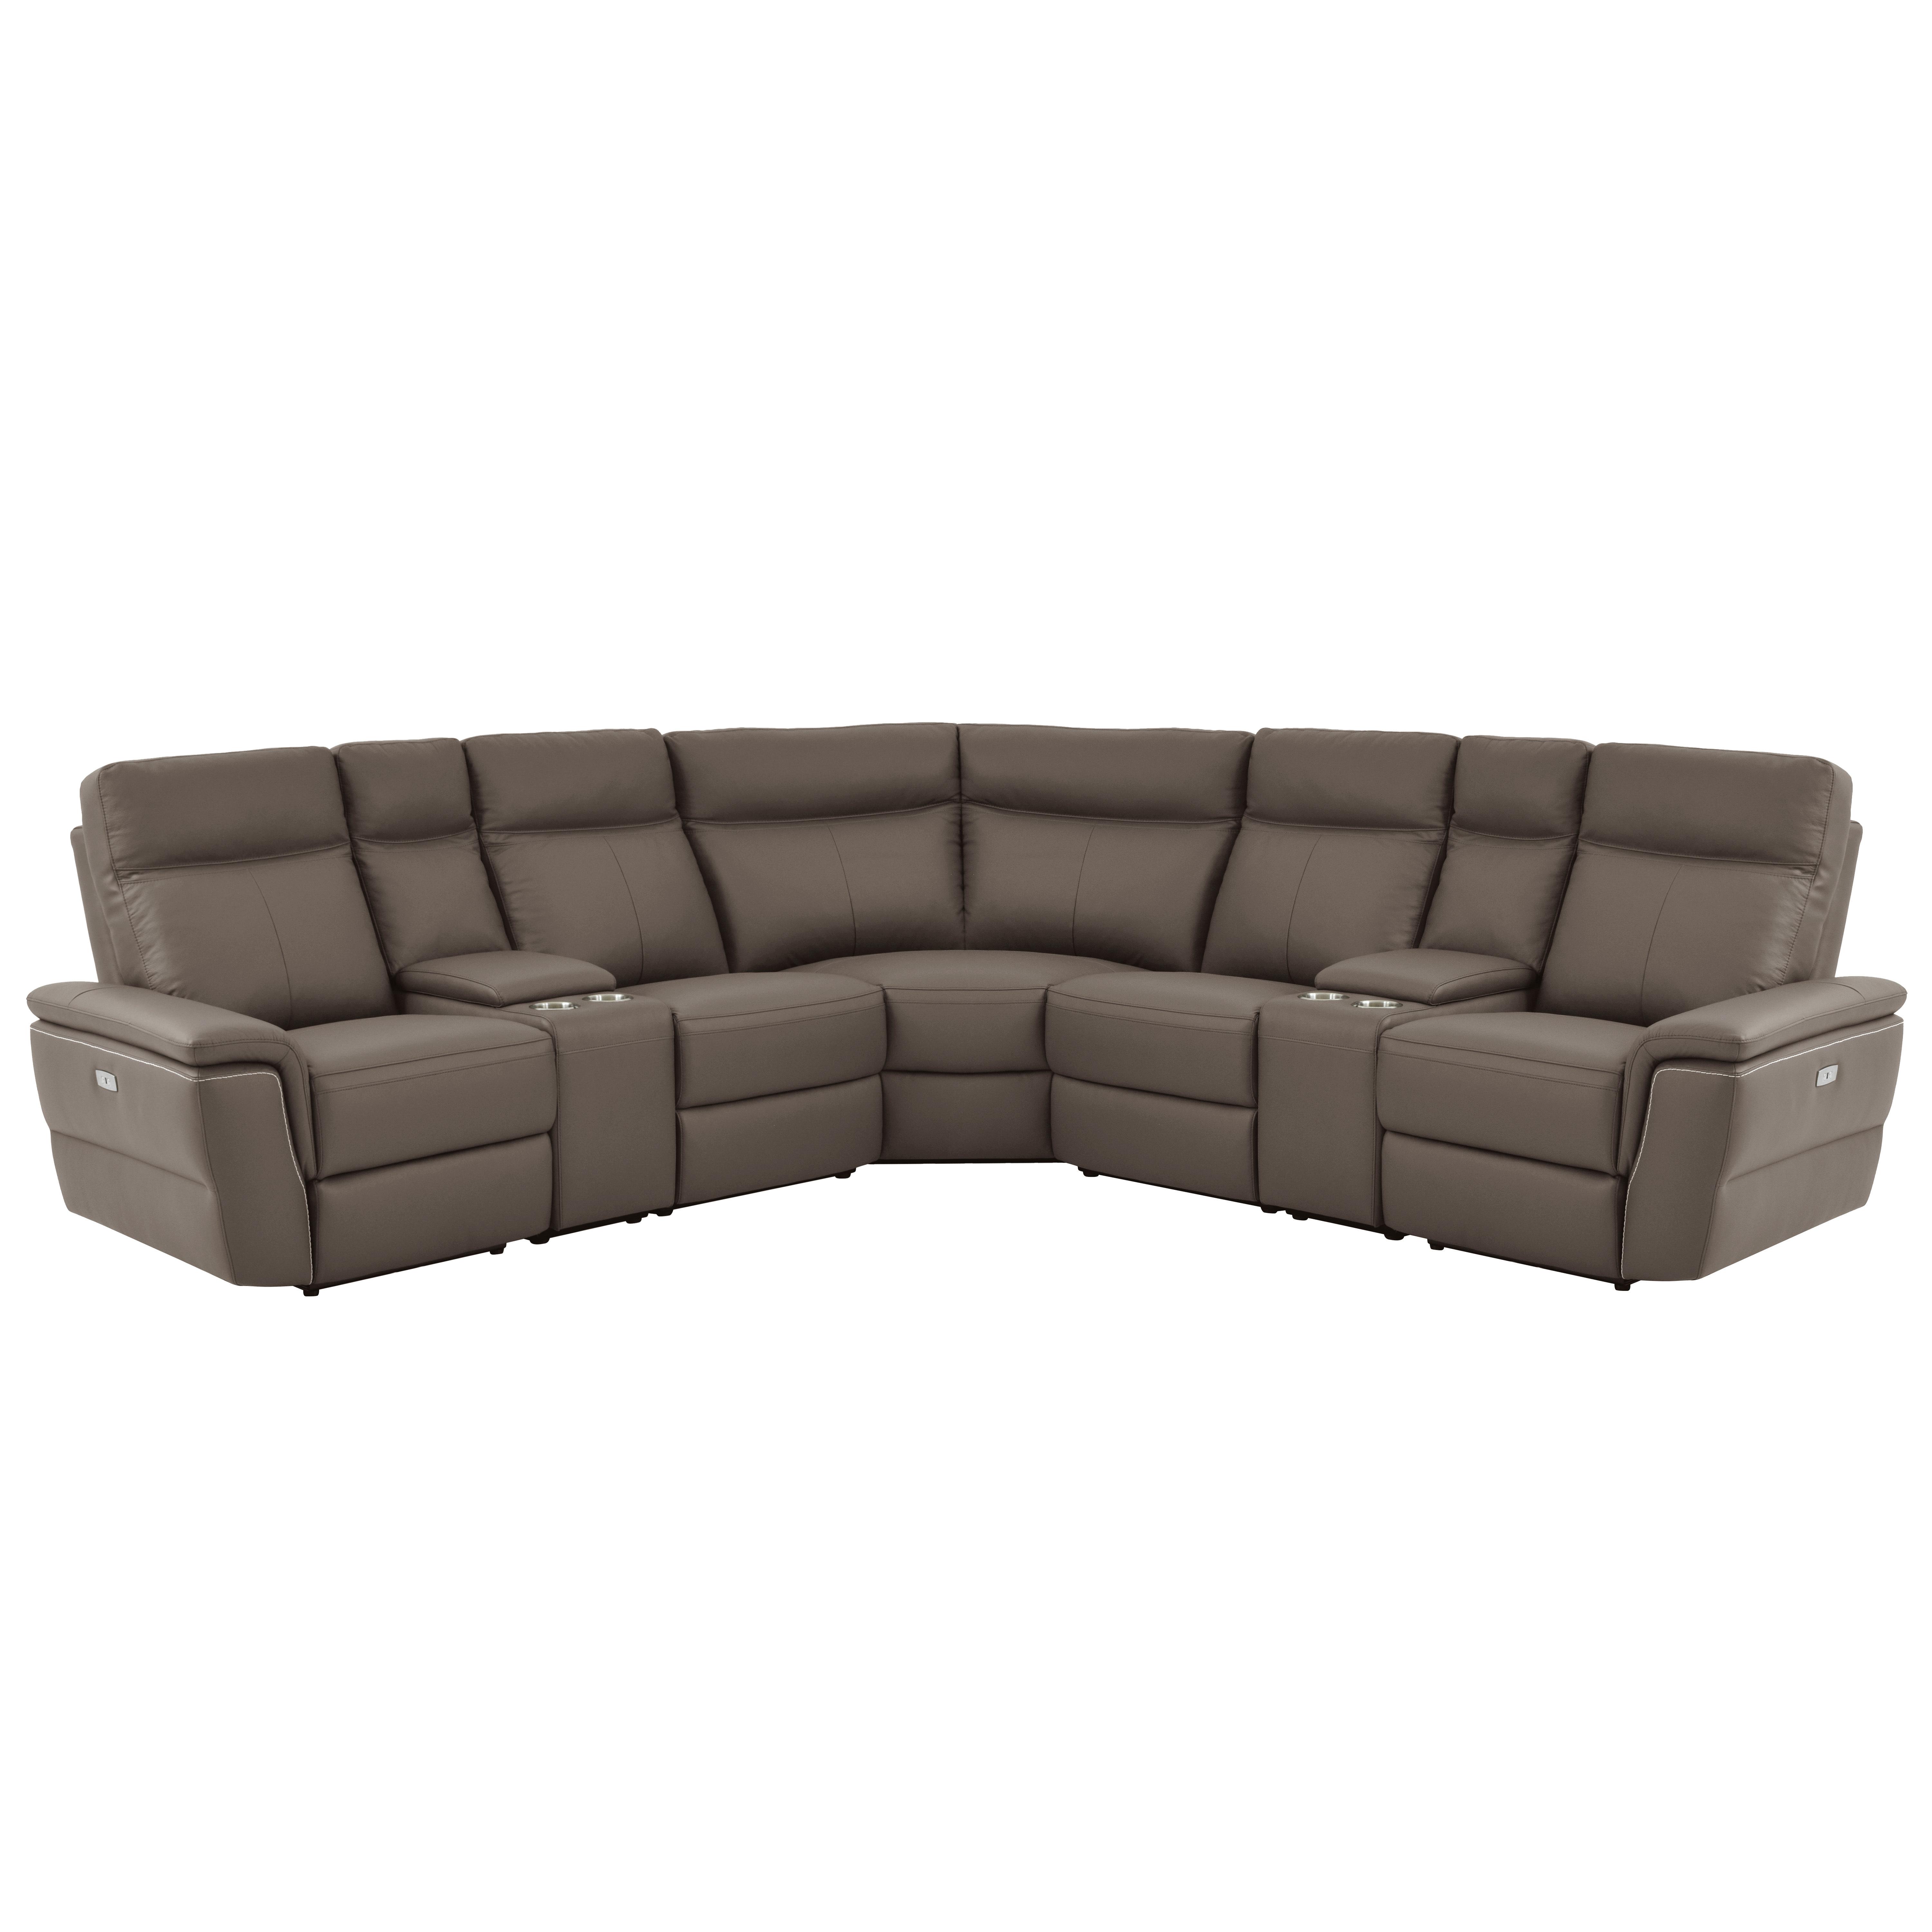 

    
Contemporary Raisin Leather 7-Piece Power Reclining Sectional Homelegance 8308*7C1PW Olympia
